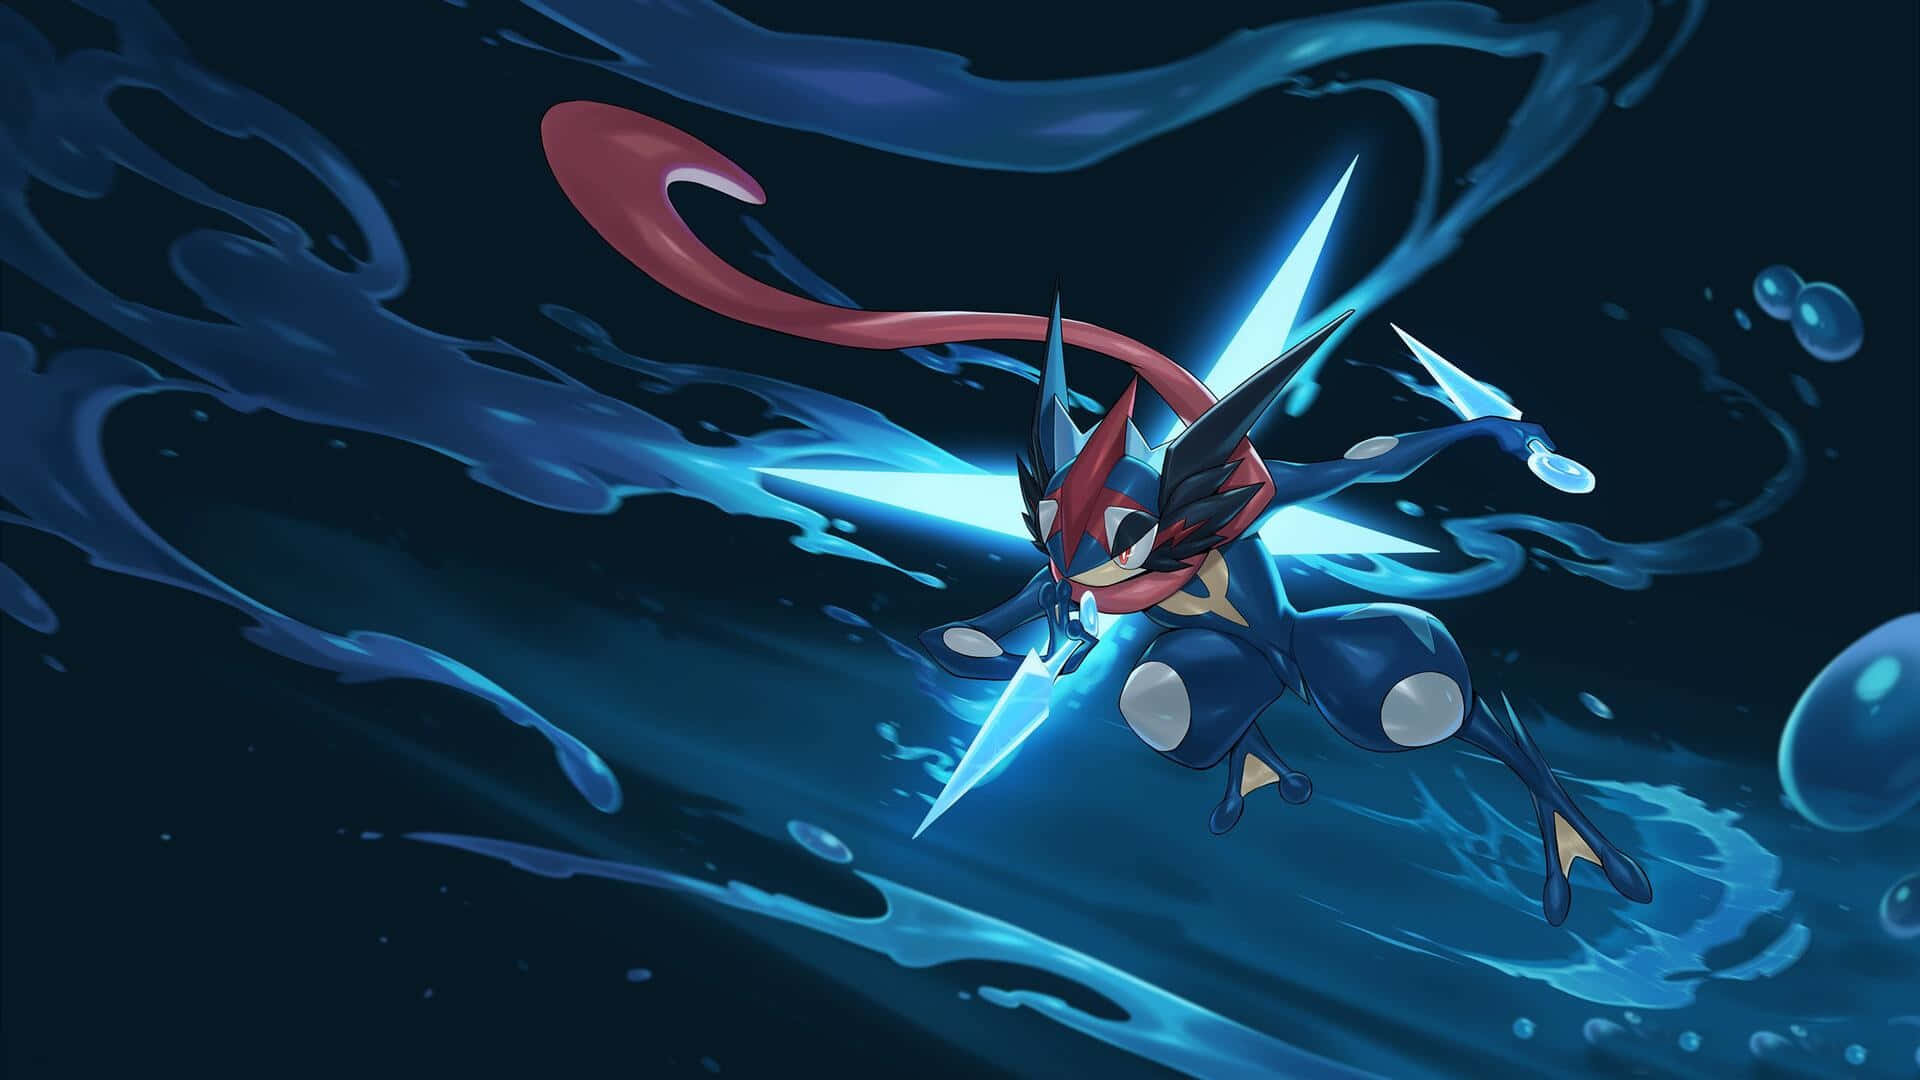 “Surge into Action with Greninja!”